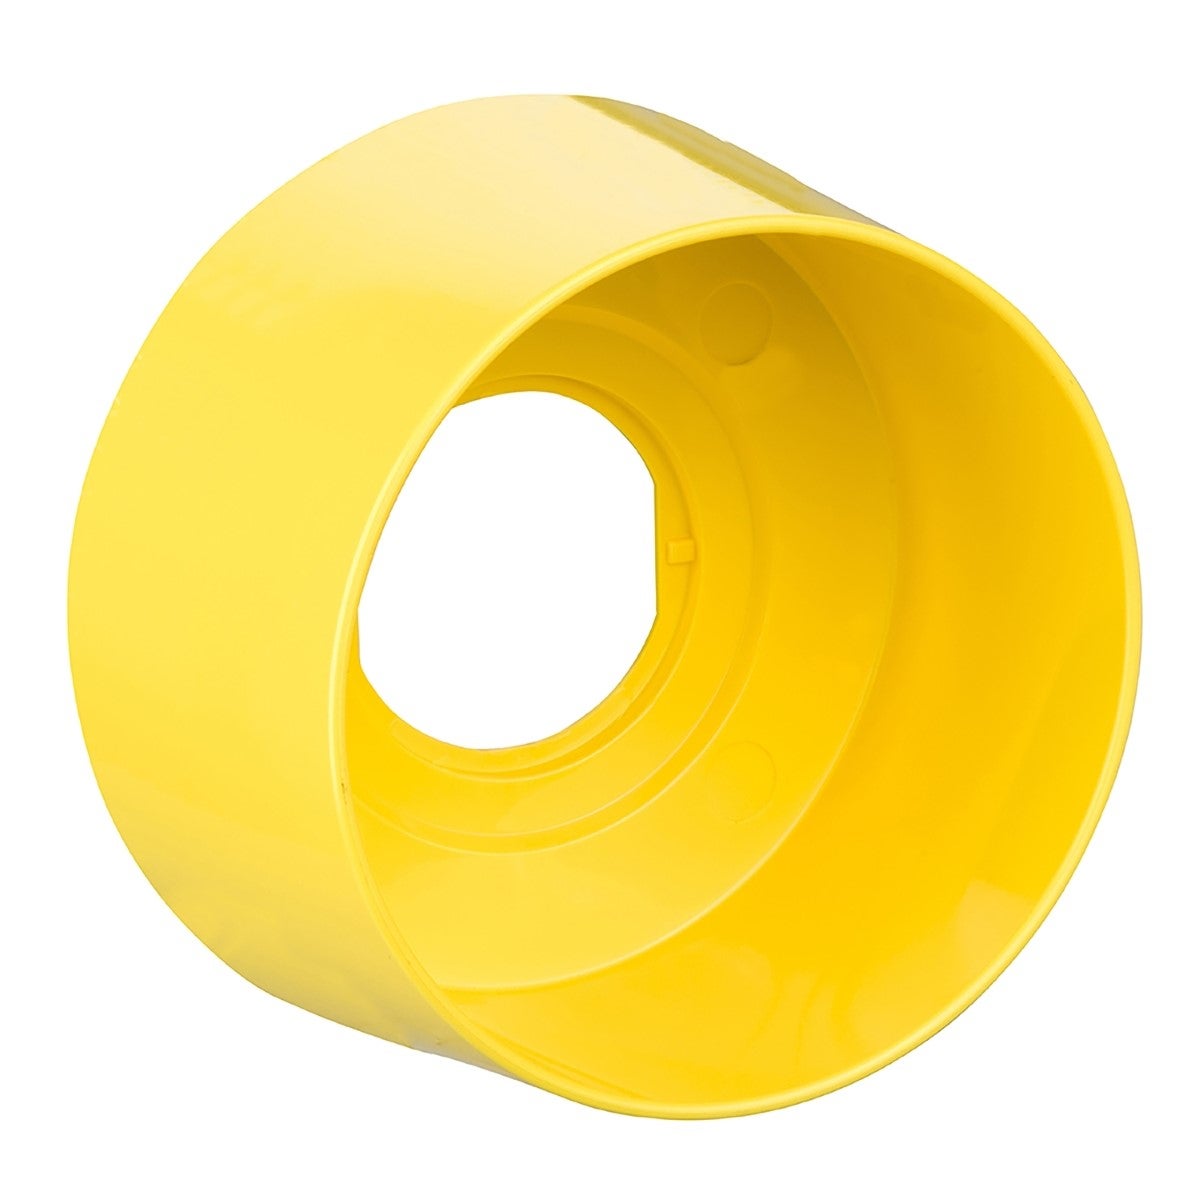 Round guard for 40mm Emergency stop, Harmony XB4, plastic, yellow, 76.2mm